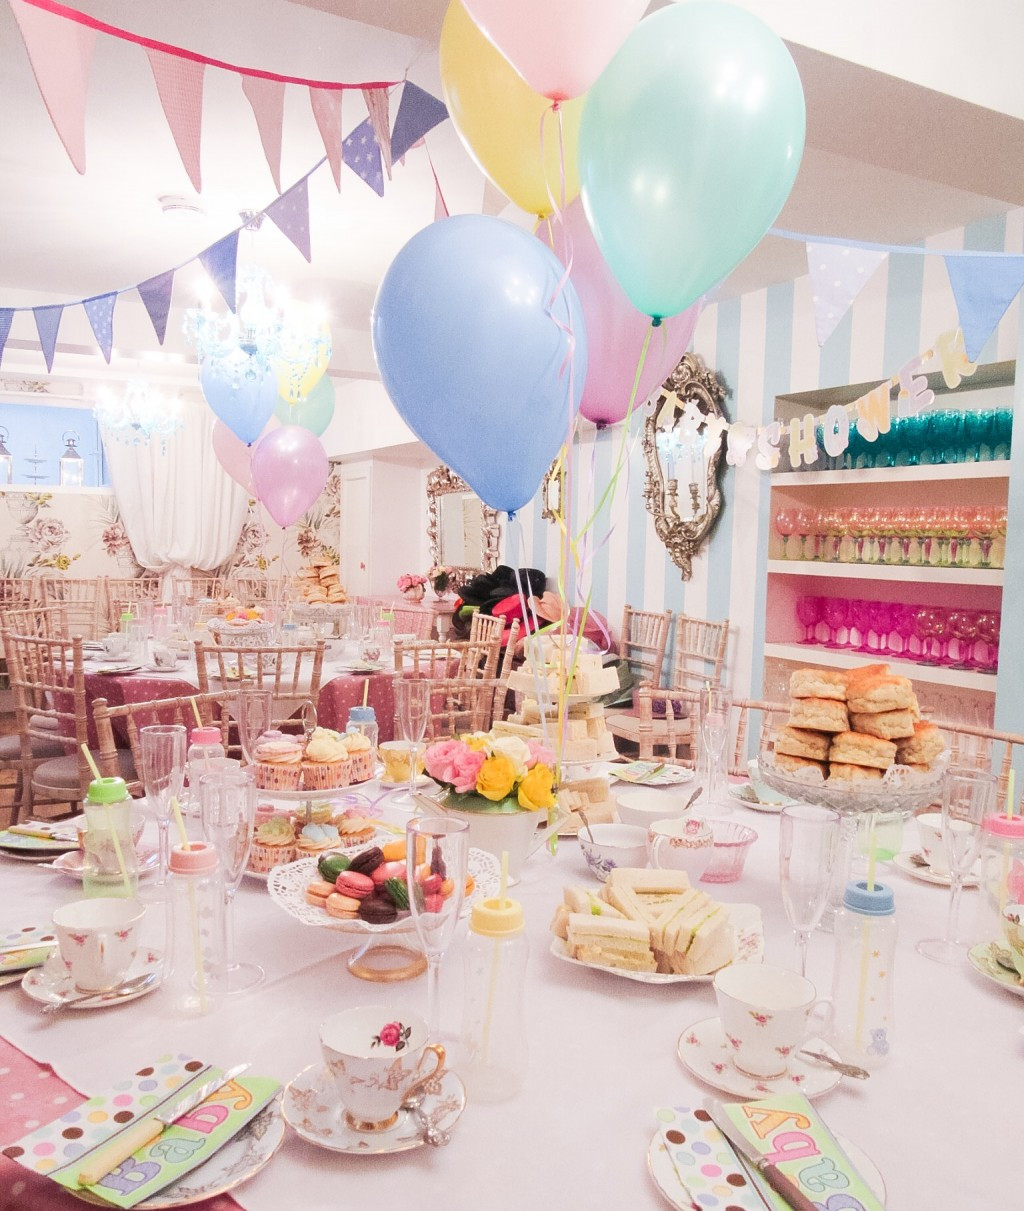 Tea Party Themed Baby Shower Ideas
 Baby Shower Afternoon Tea Venue North London Tea Party